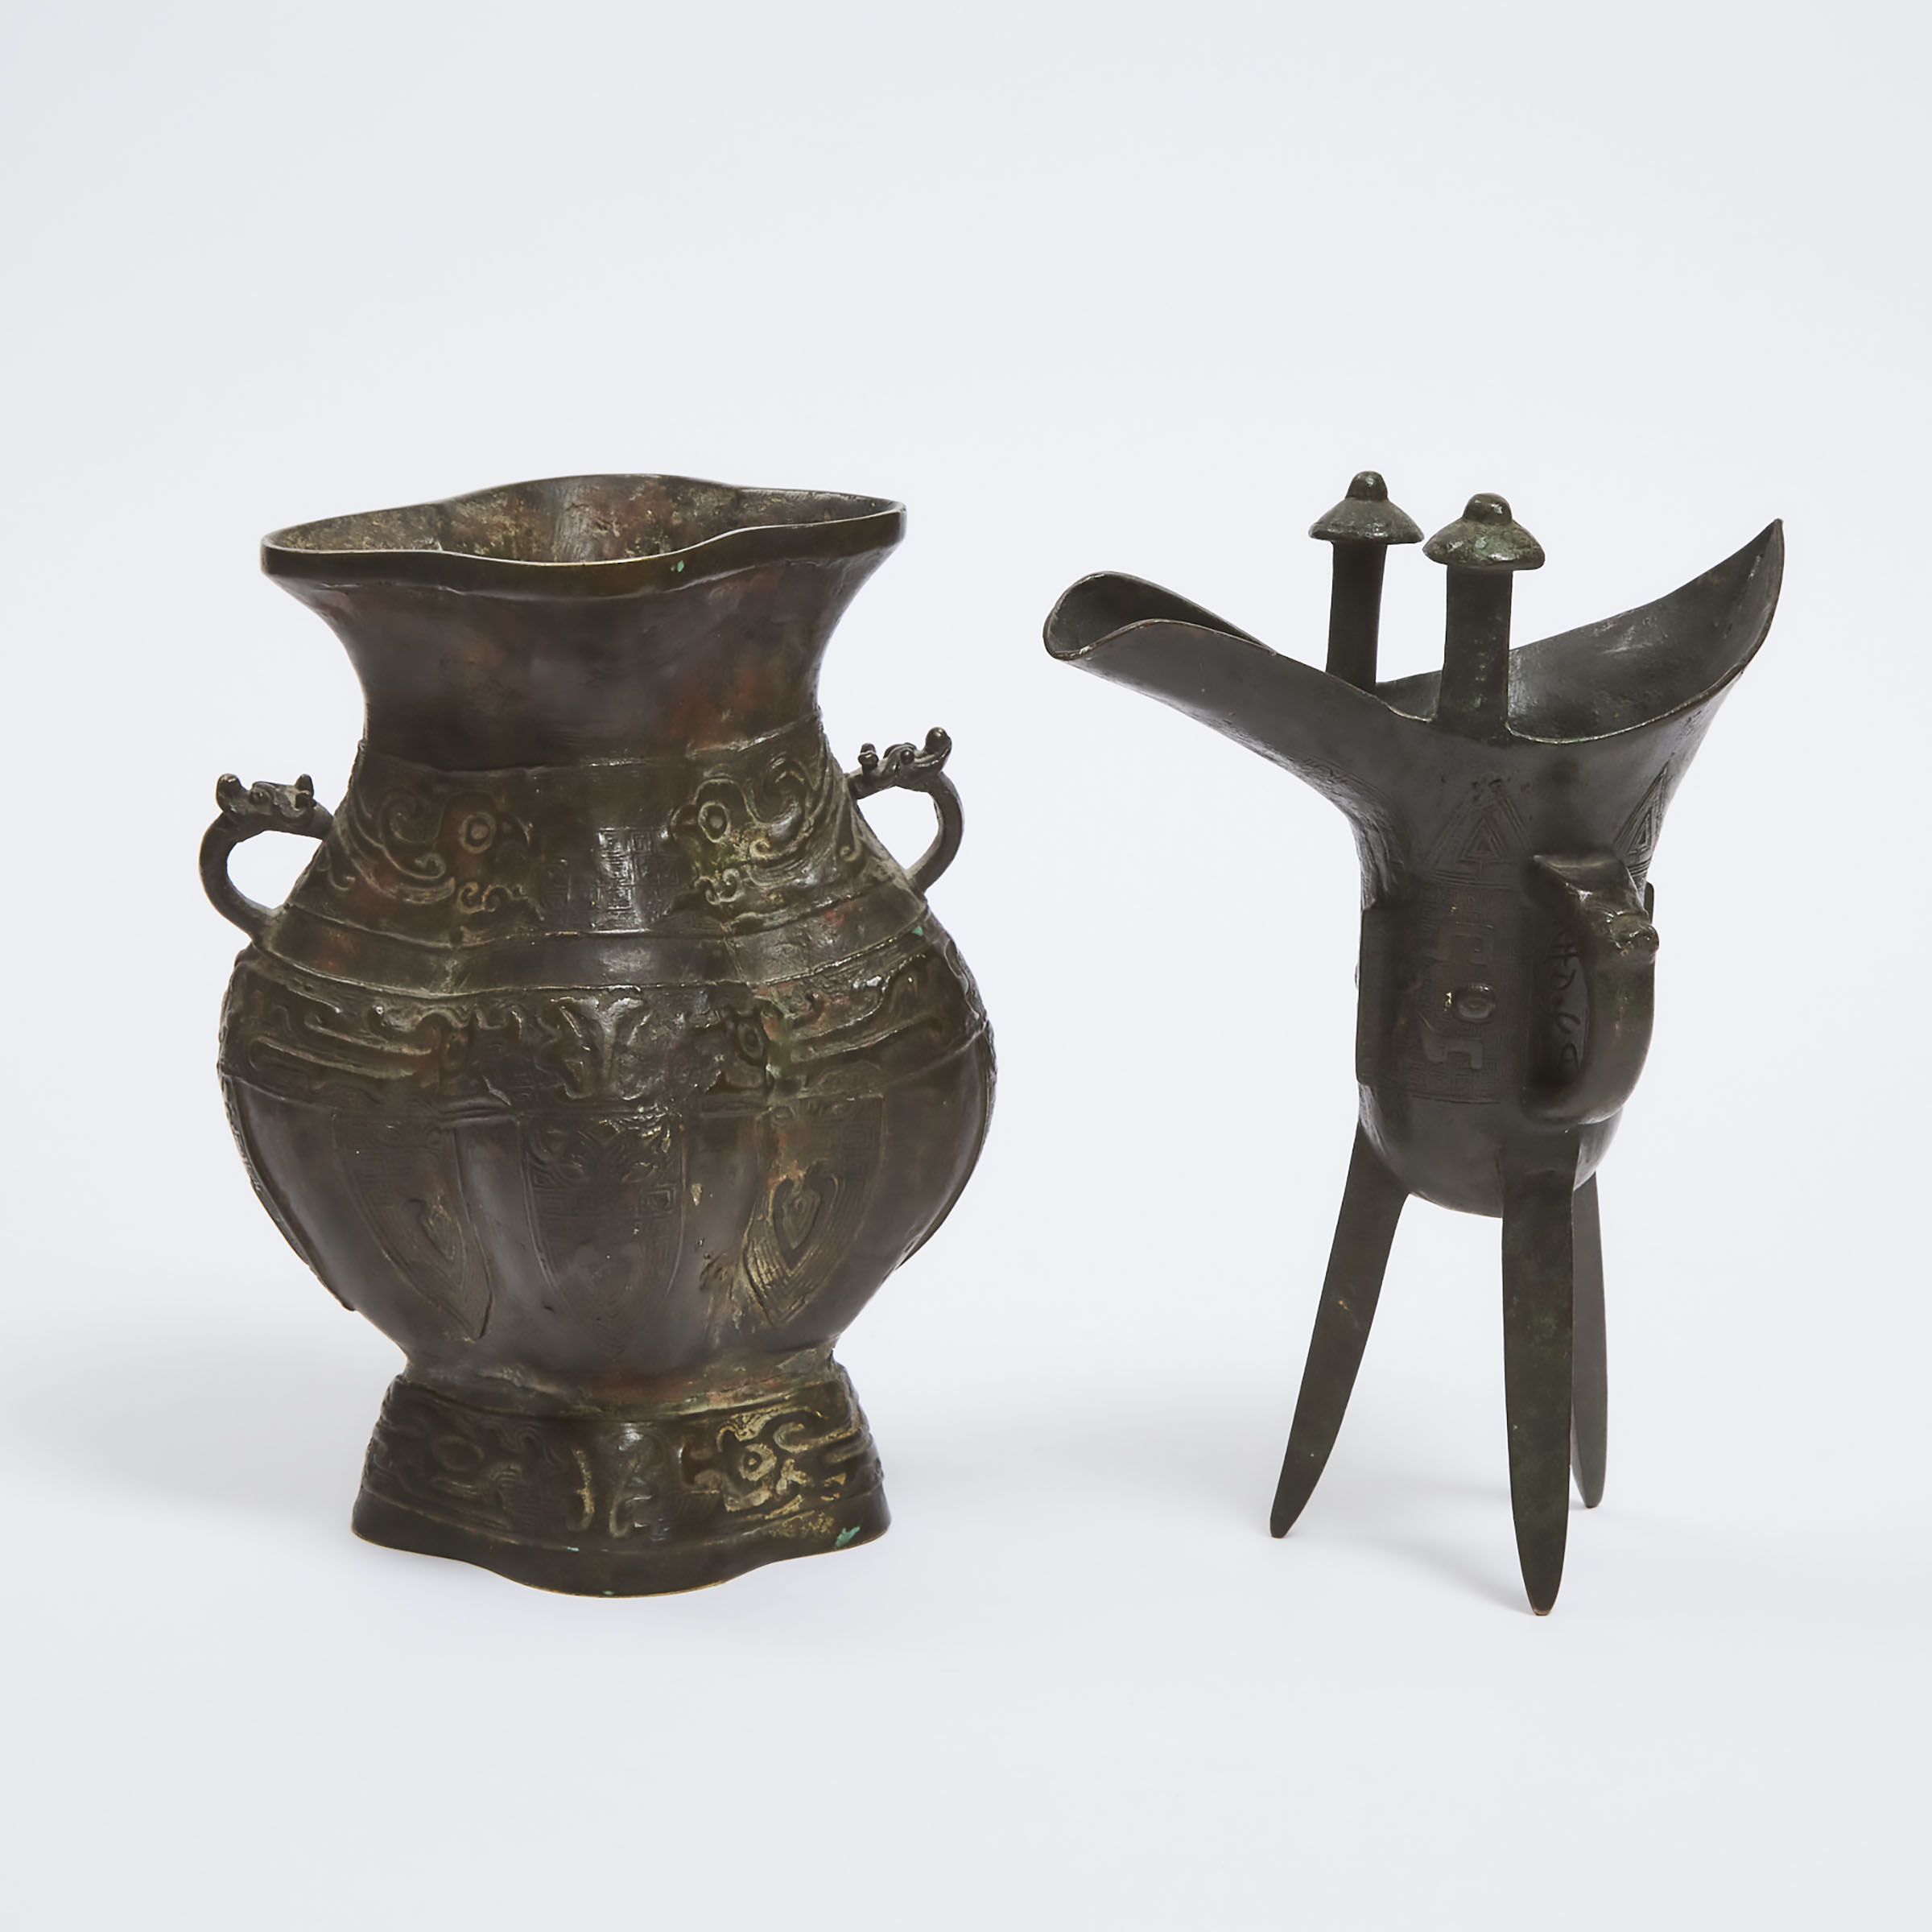 Two Bronze Archaic-Style Vessels, Ming/Qing Dynasty